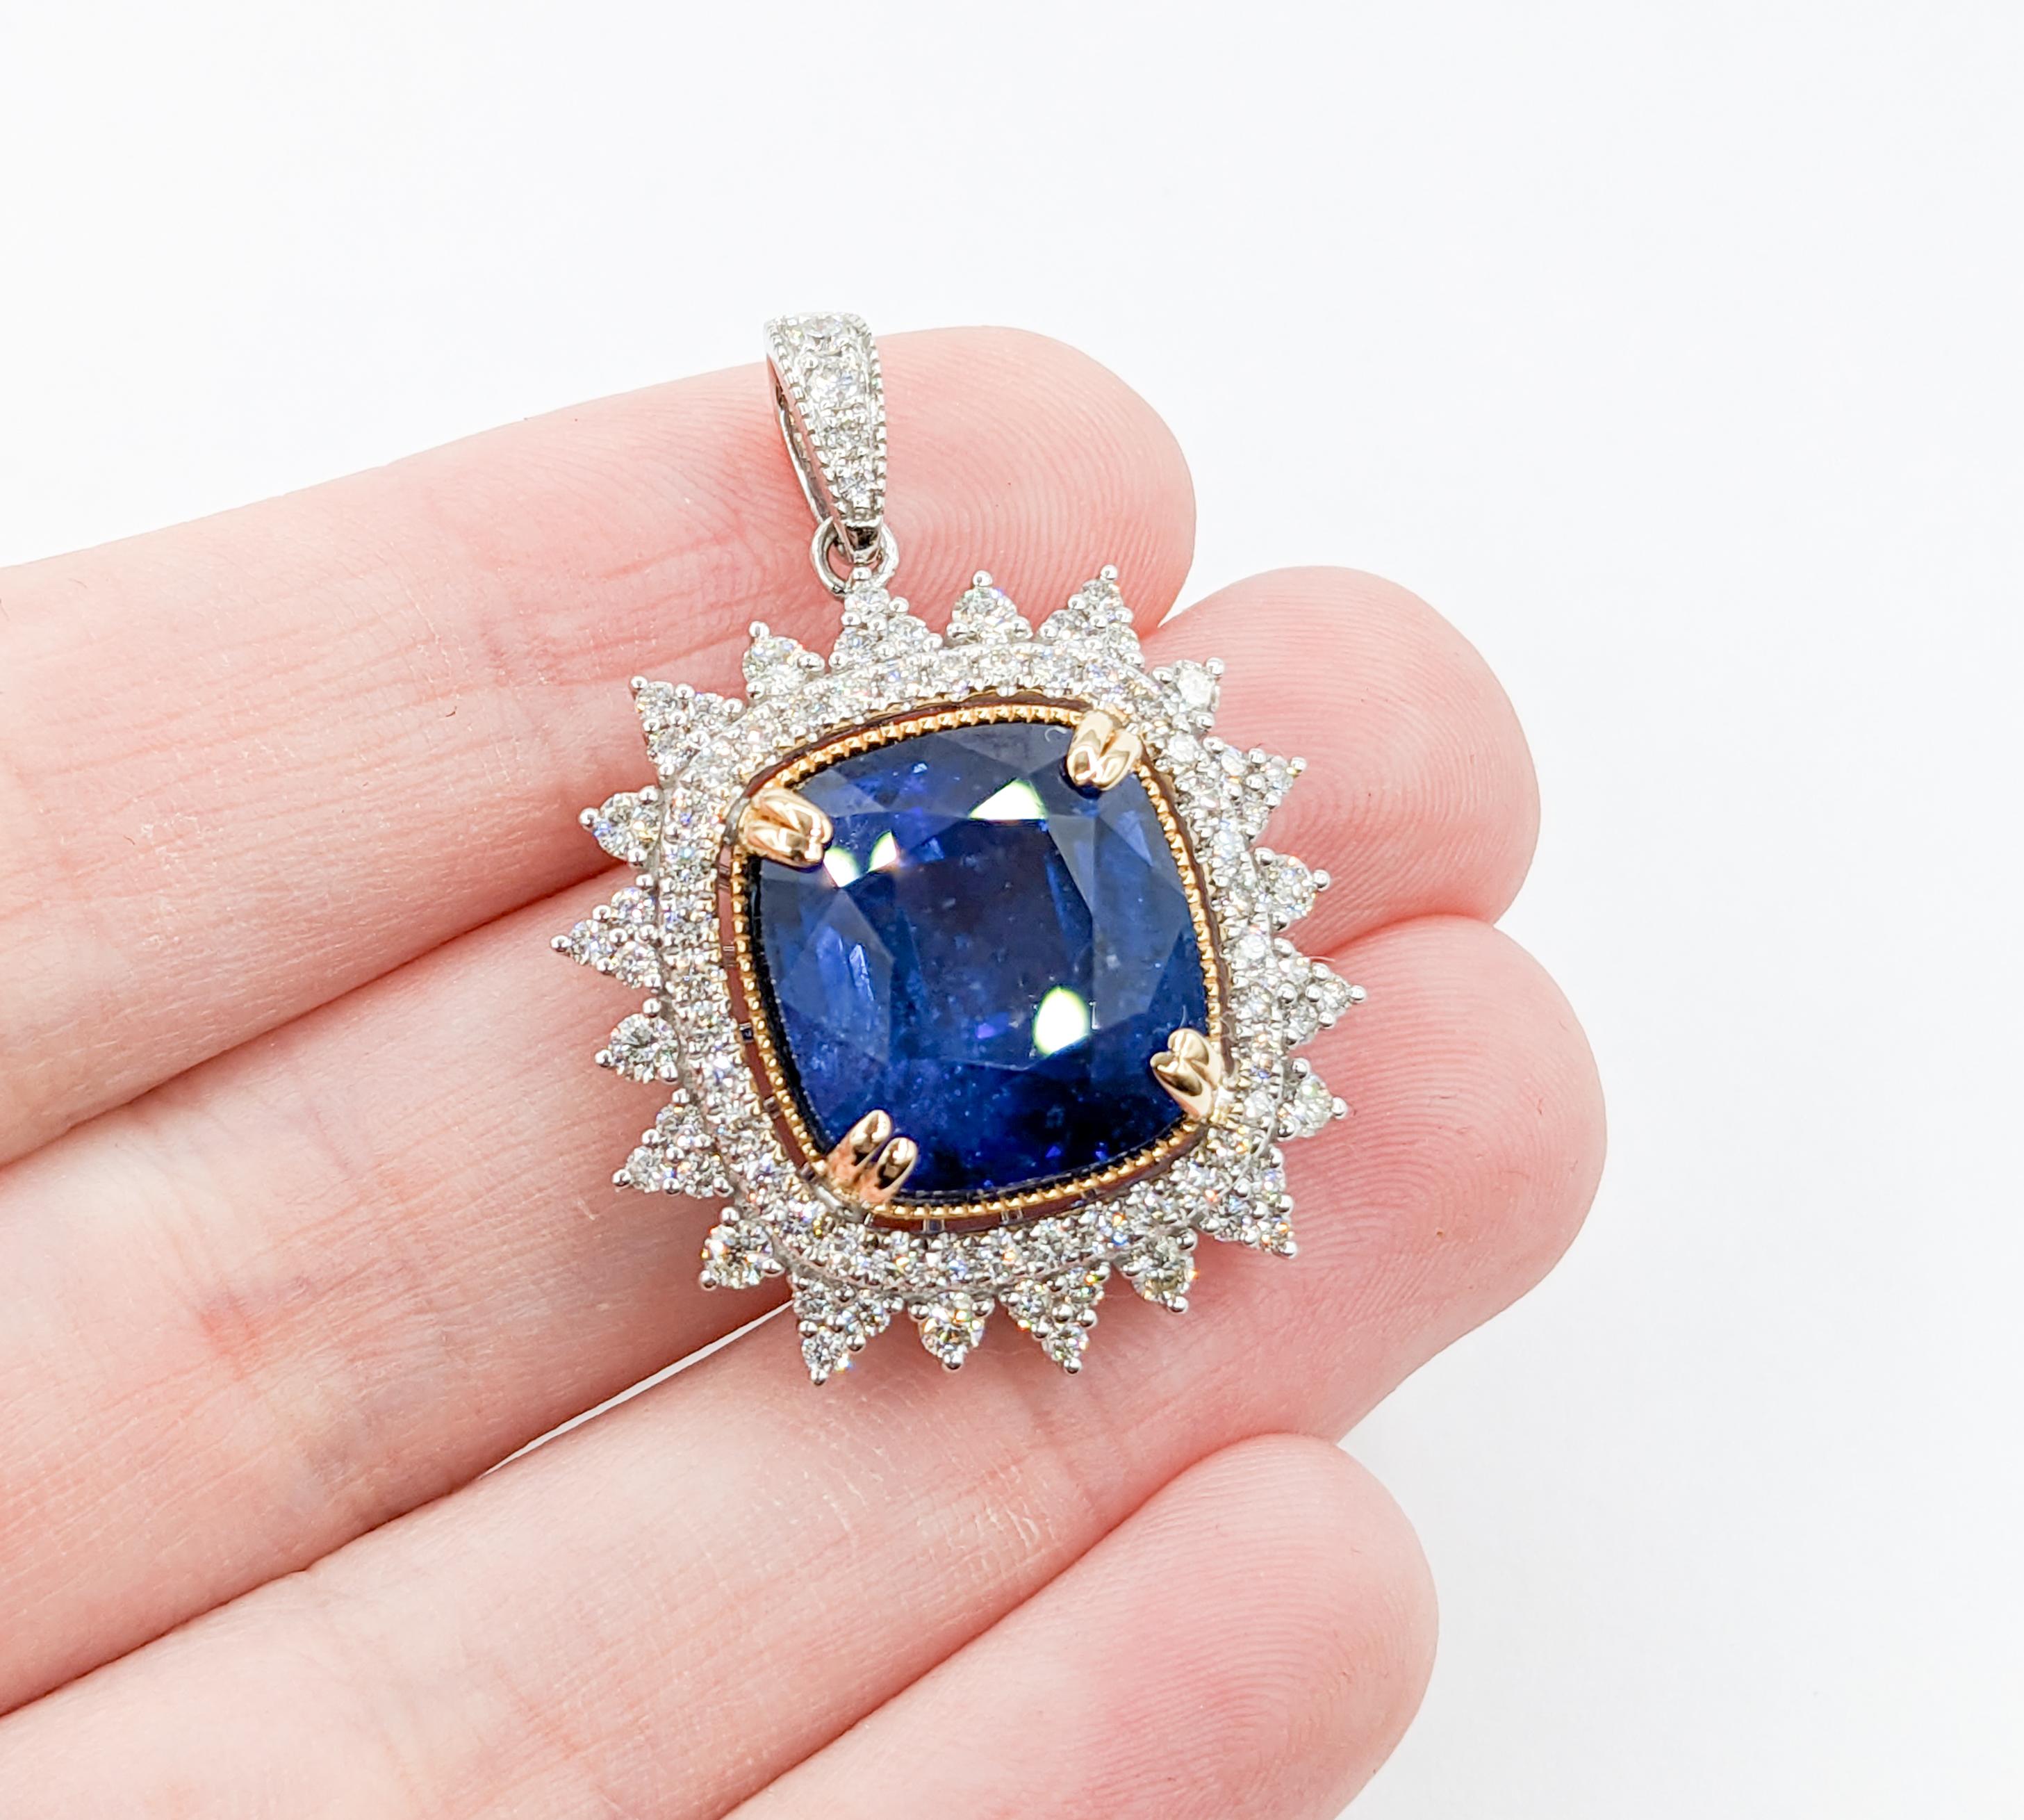 Stunning 14.2ct Sapphire Pendant with Diamond Halo in 14kt White Gold In New Condition For Sale In Bloomington, MN